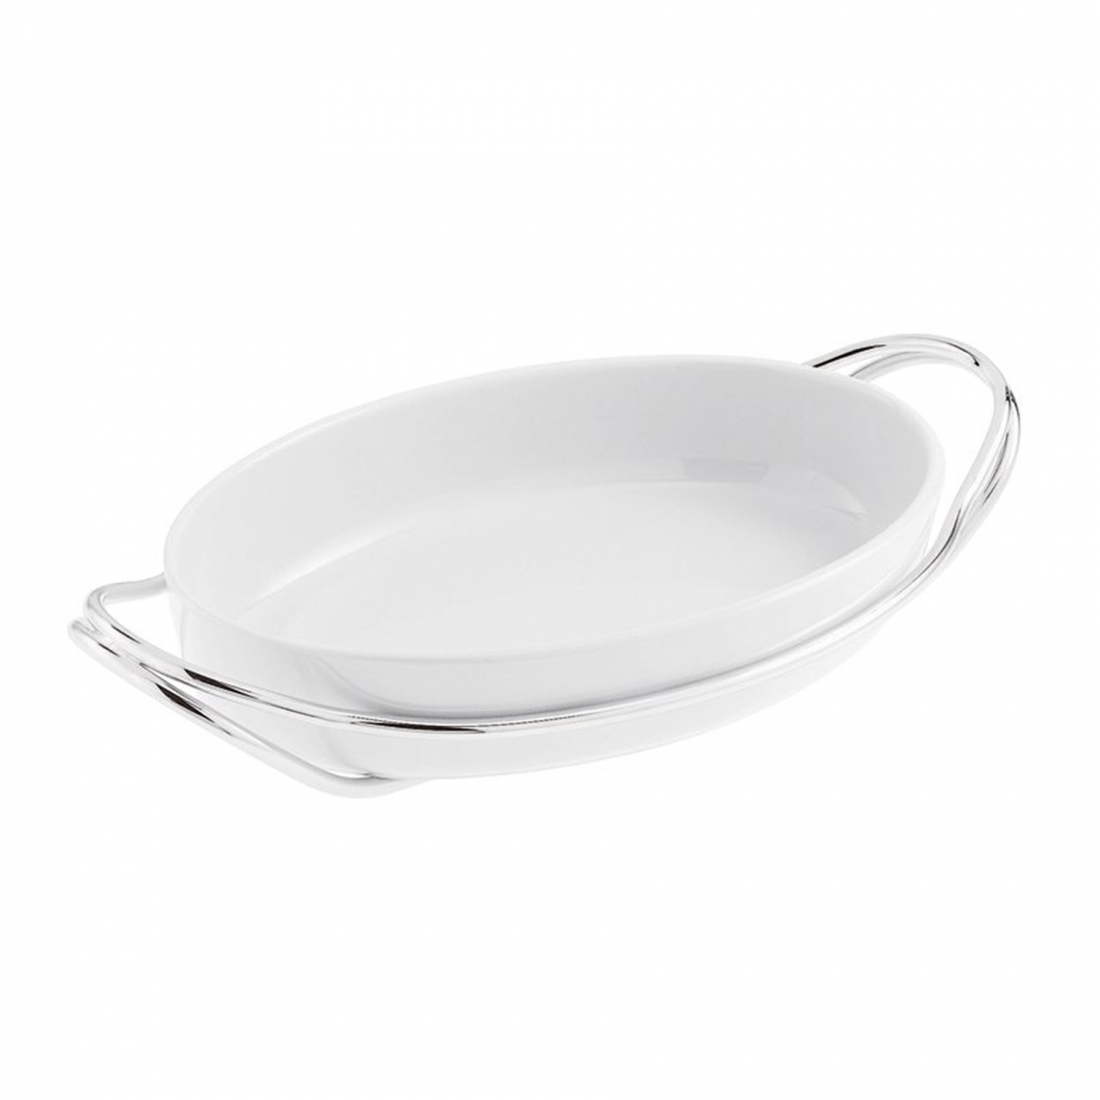 Oval banking dish with support cm 35